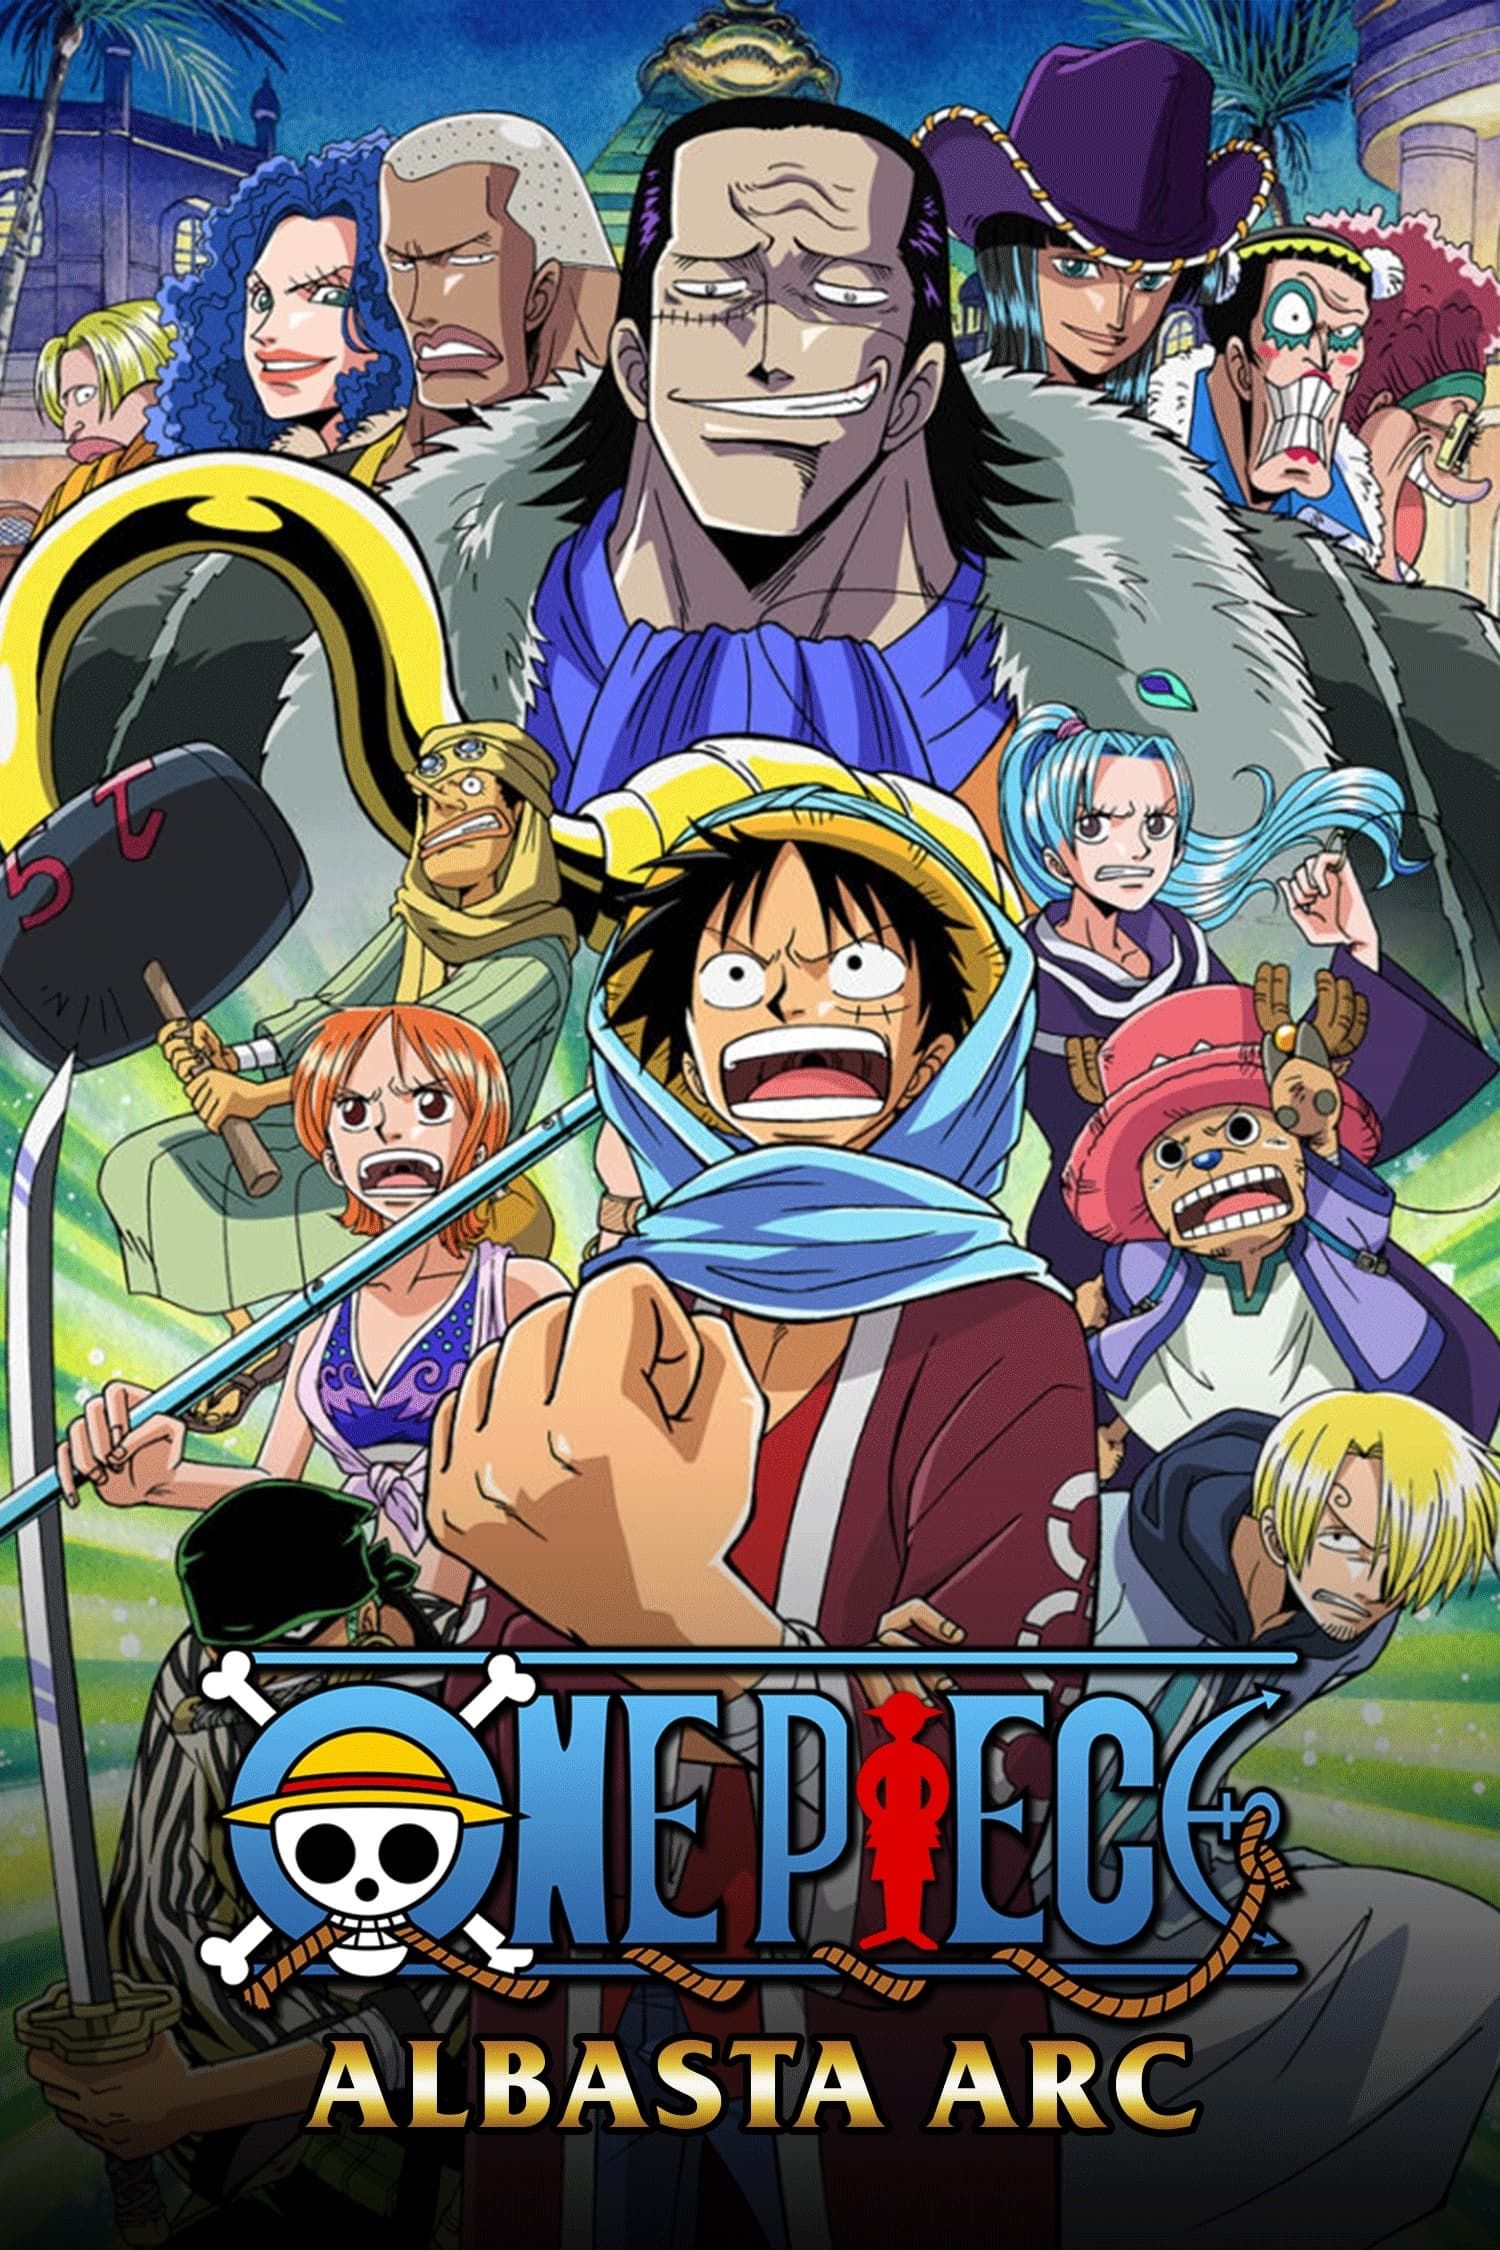 One Piece Episode 999 Discussion - Forums 